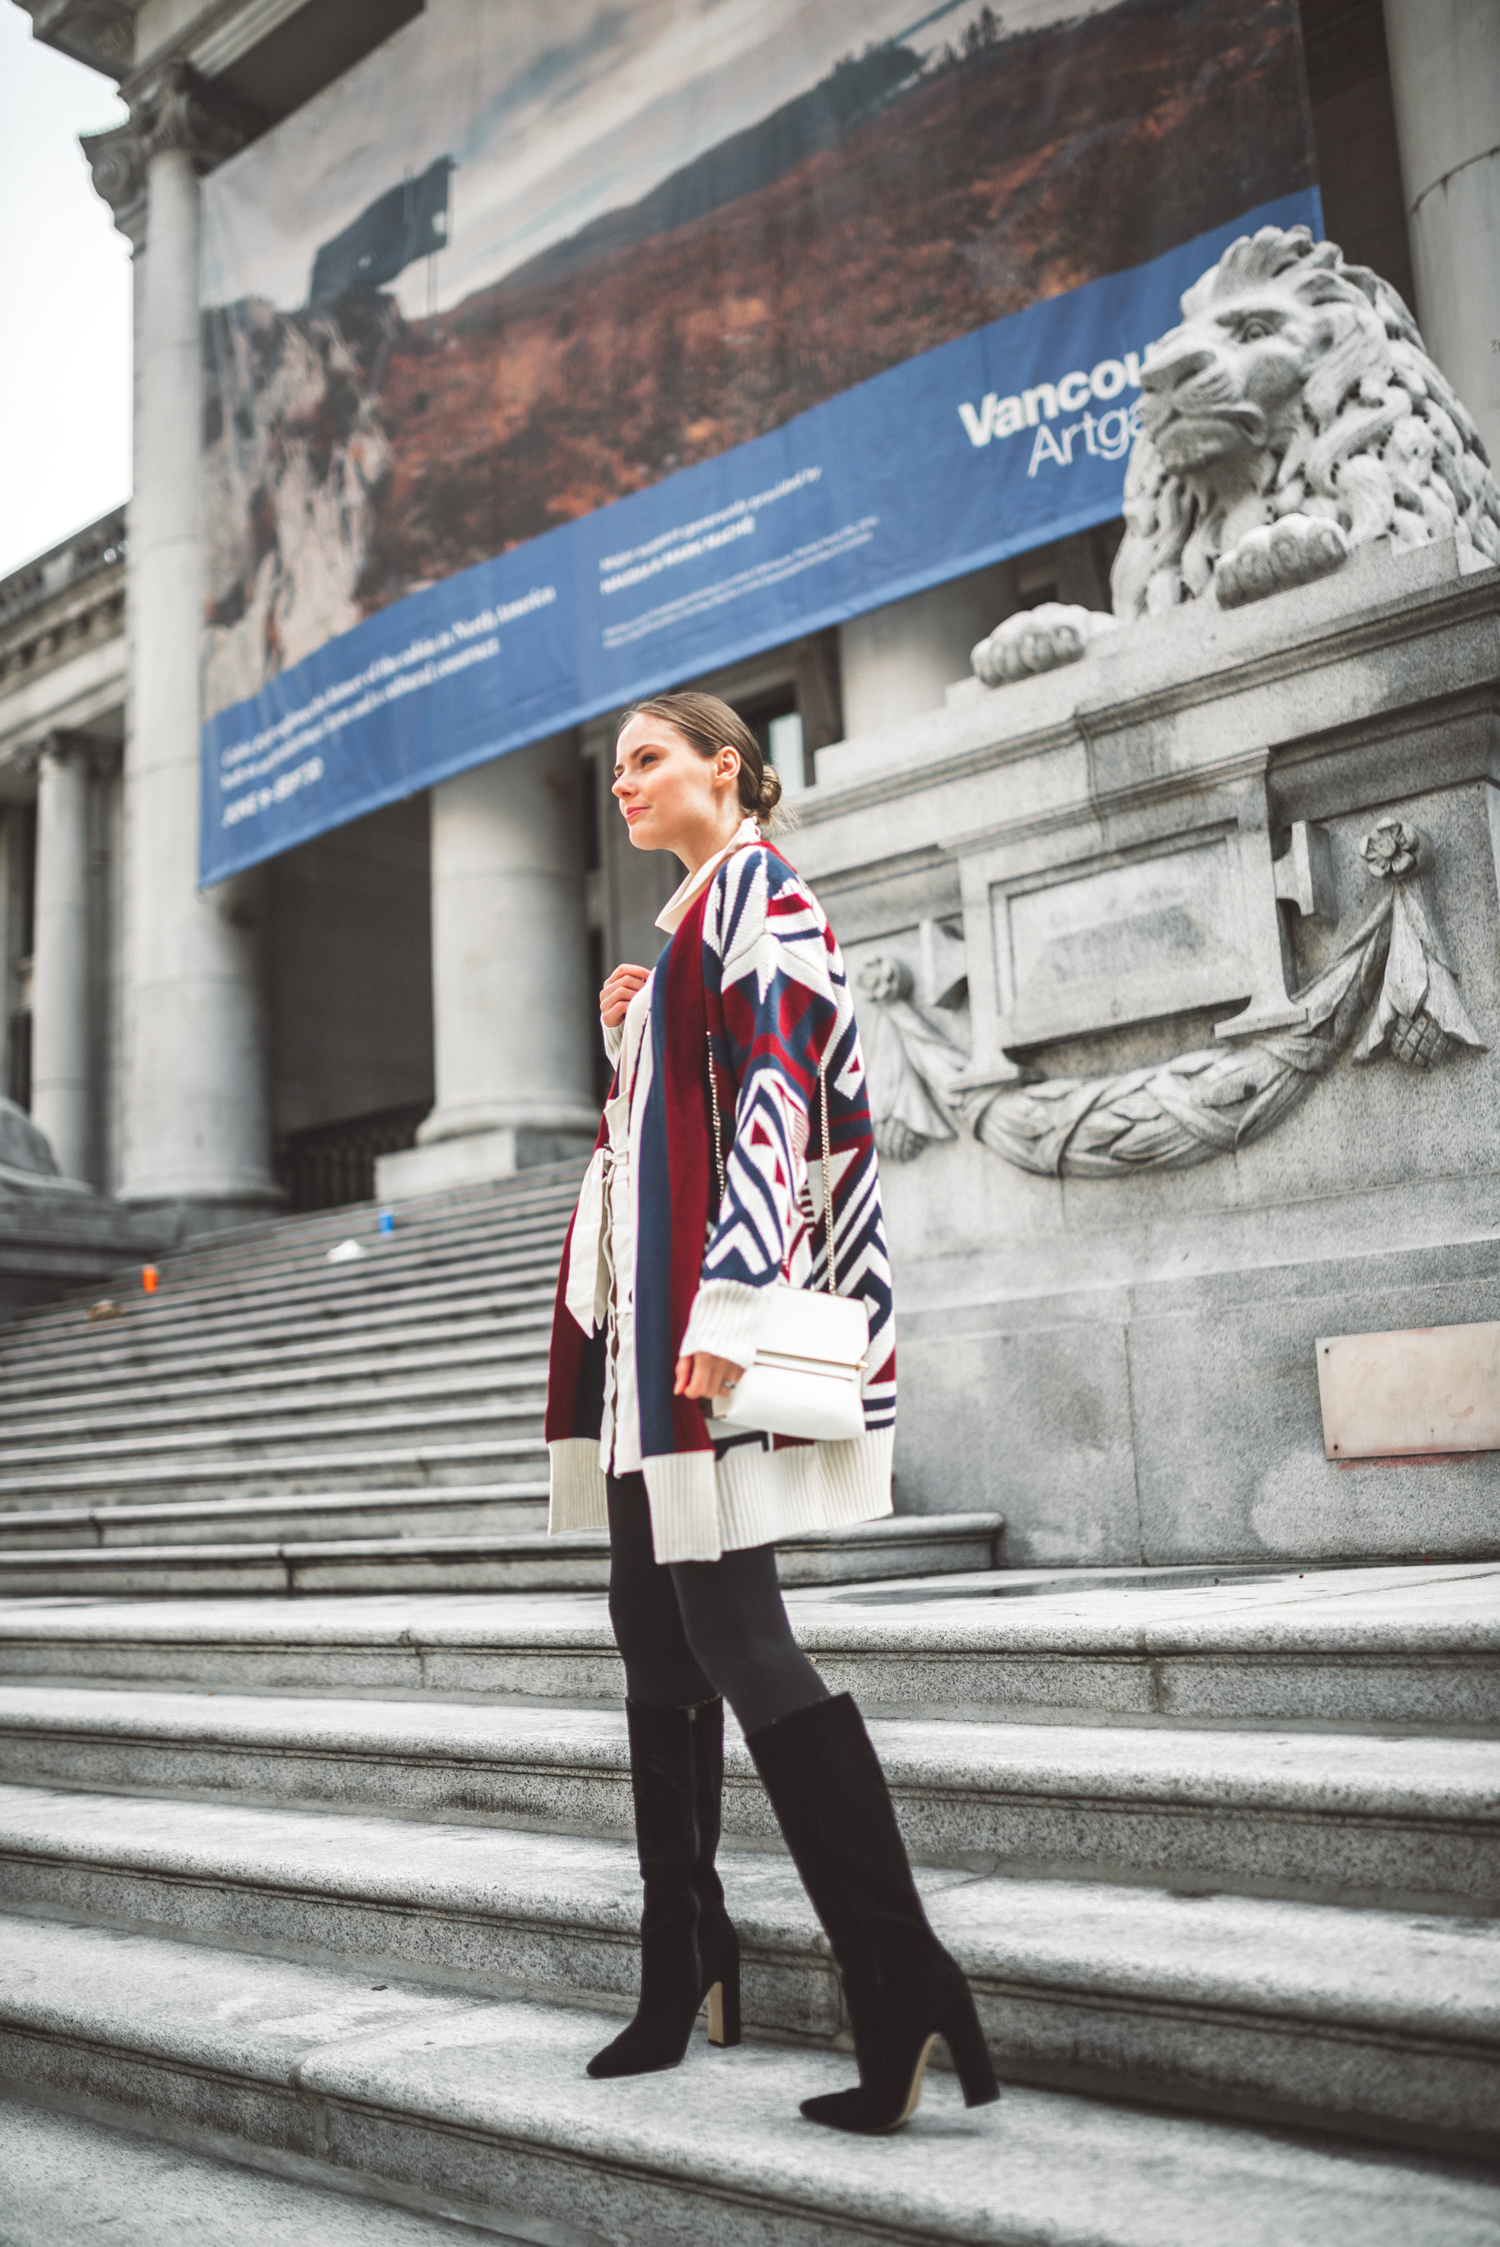 Alyssa Campanella of The A List blog shares the best in sweater coats wearing Tularosa Page sweater, Raye Maple boots, and Strathberry East West stylist bag.